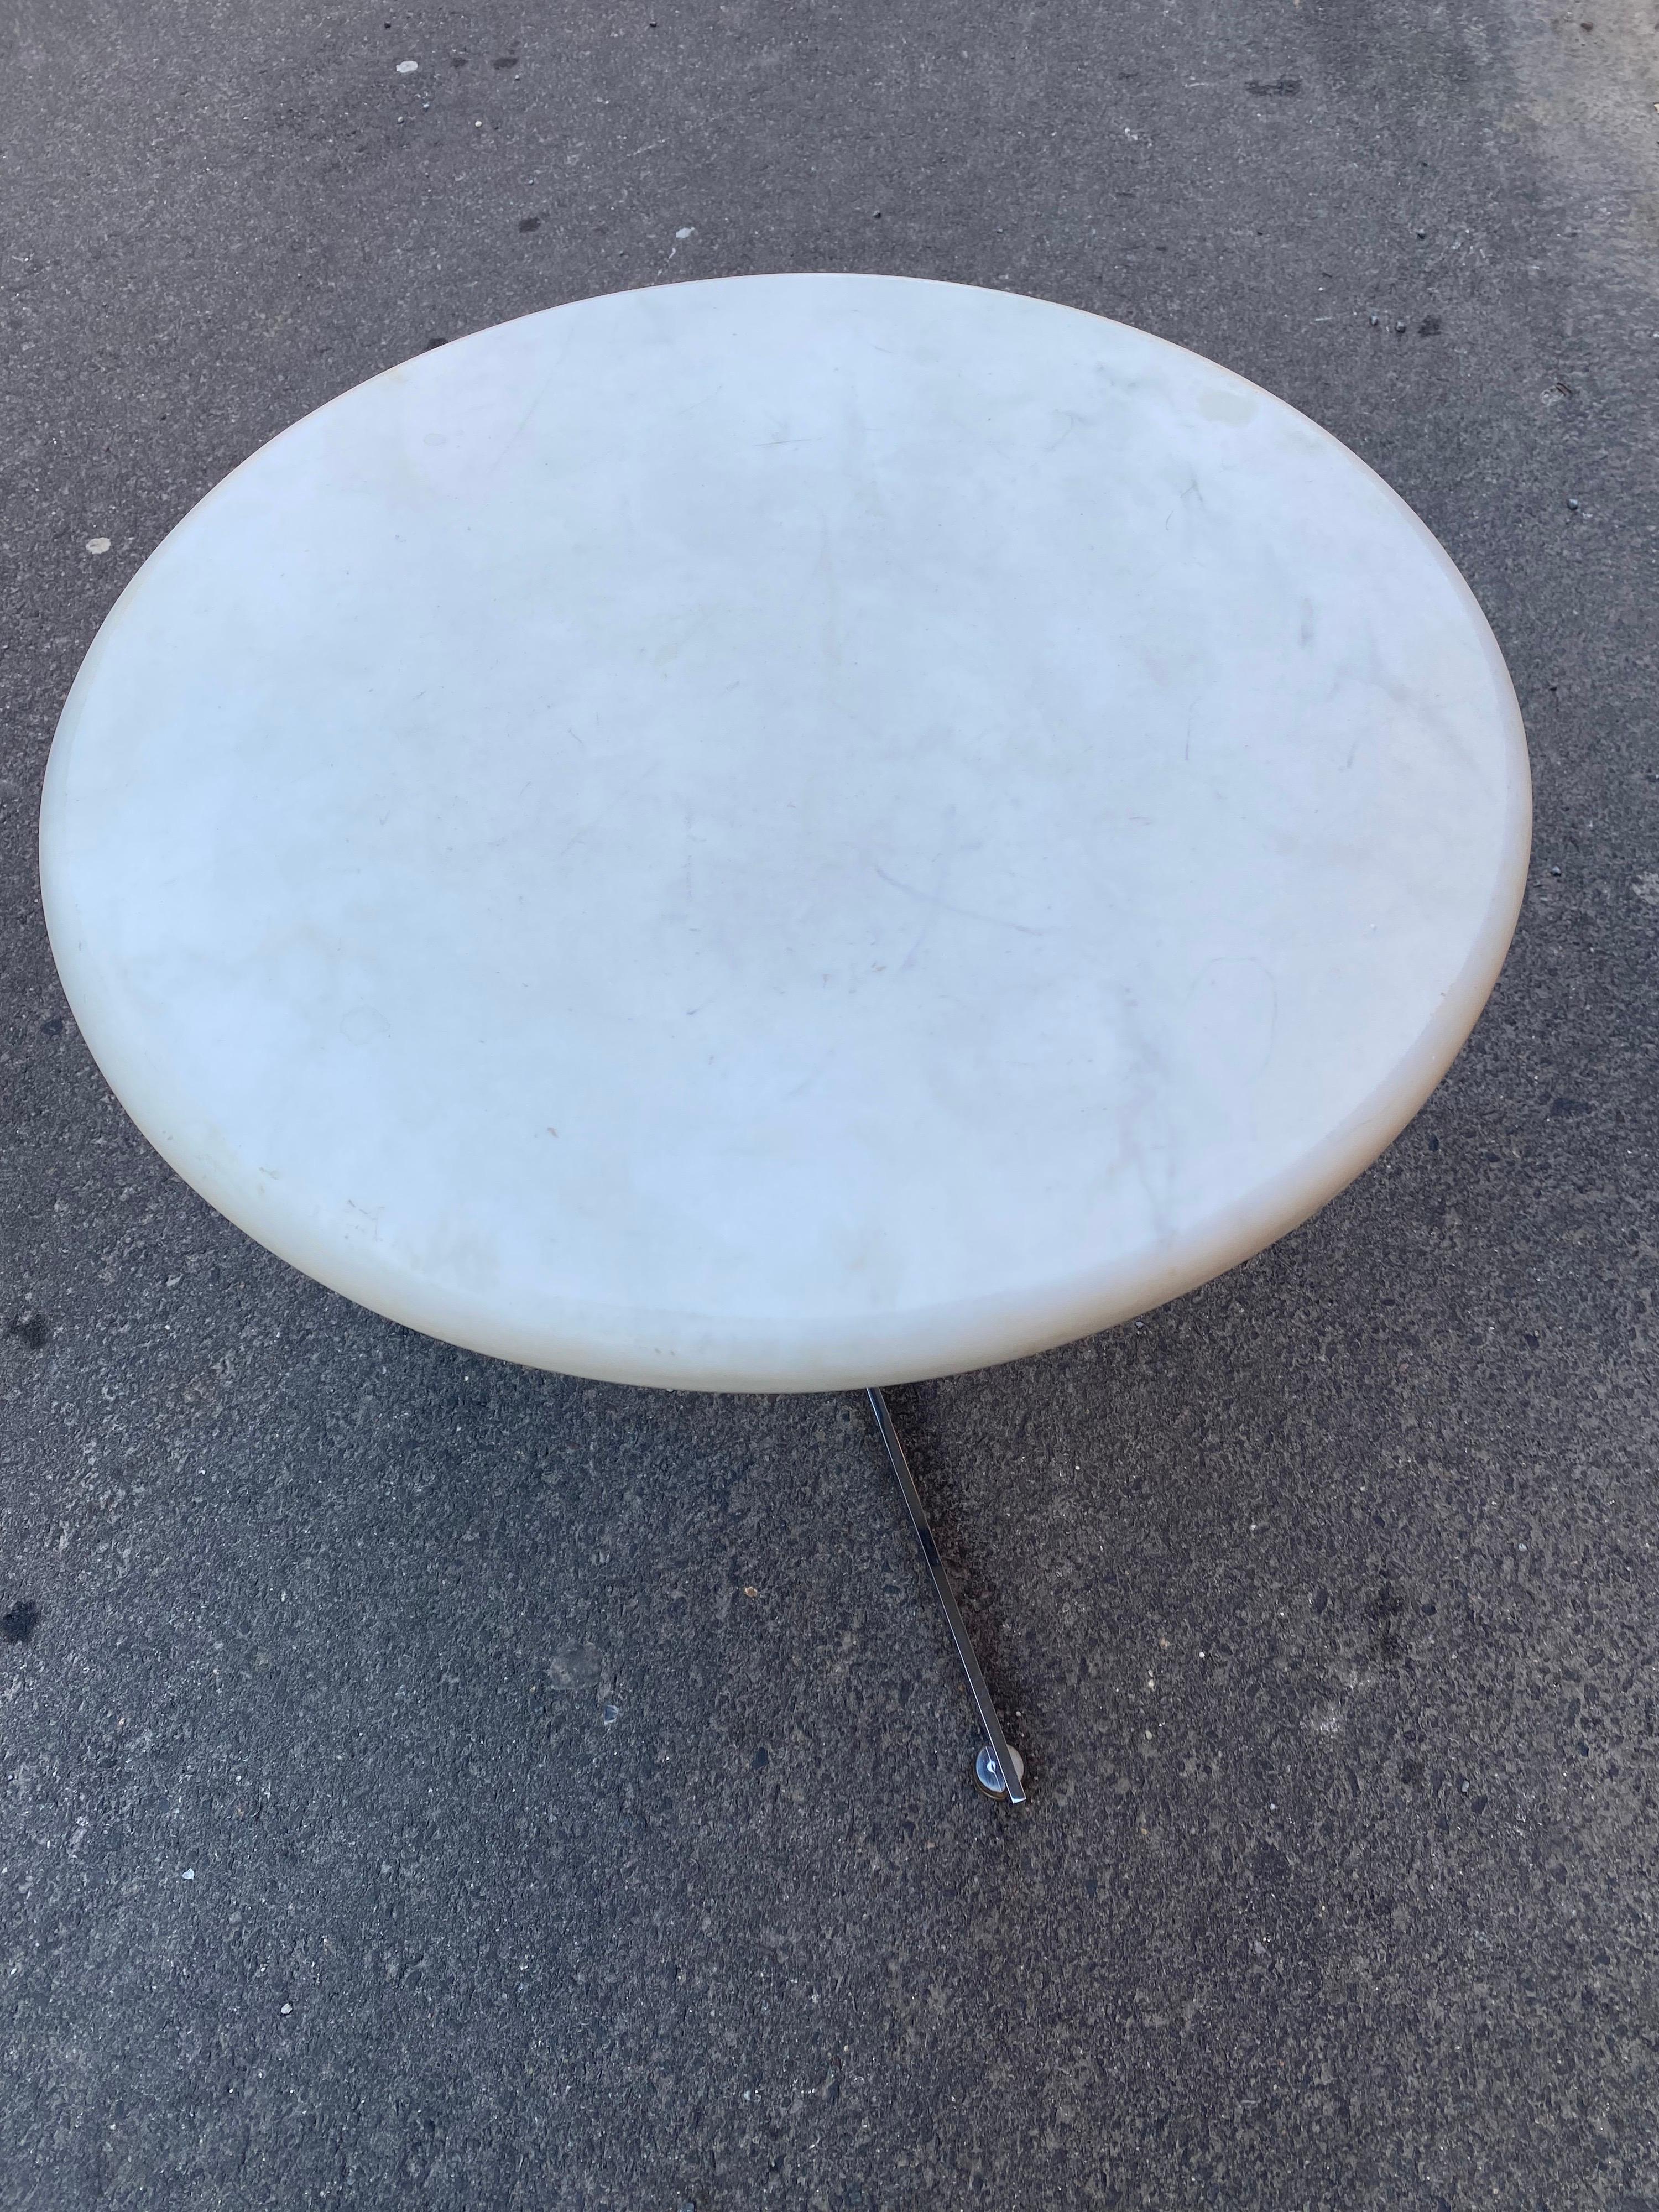 Hans Eichenberger for Ernst Ries & Sohn Round Heavy Marble Side Table with a Chrome Base. Base is made up of 3 L shaped Chrome pieces that attach to form 3 legs. Each leg has a round chrome foot. Unique Simple Design! Table sits rock solid! White